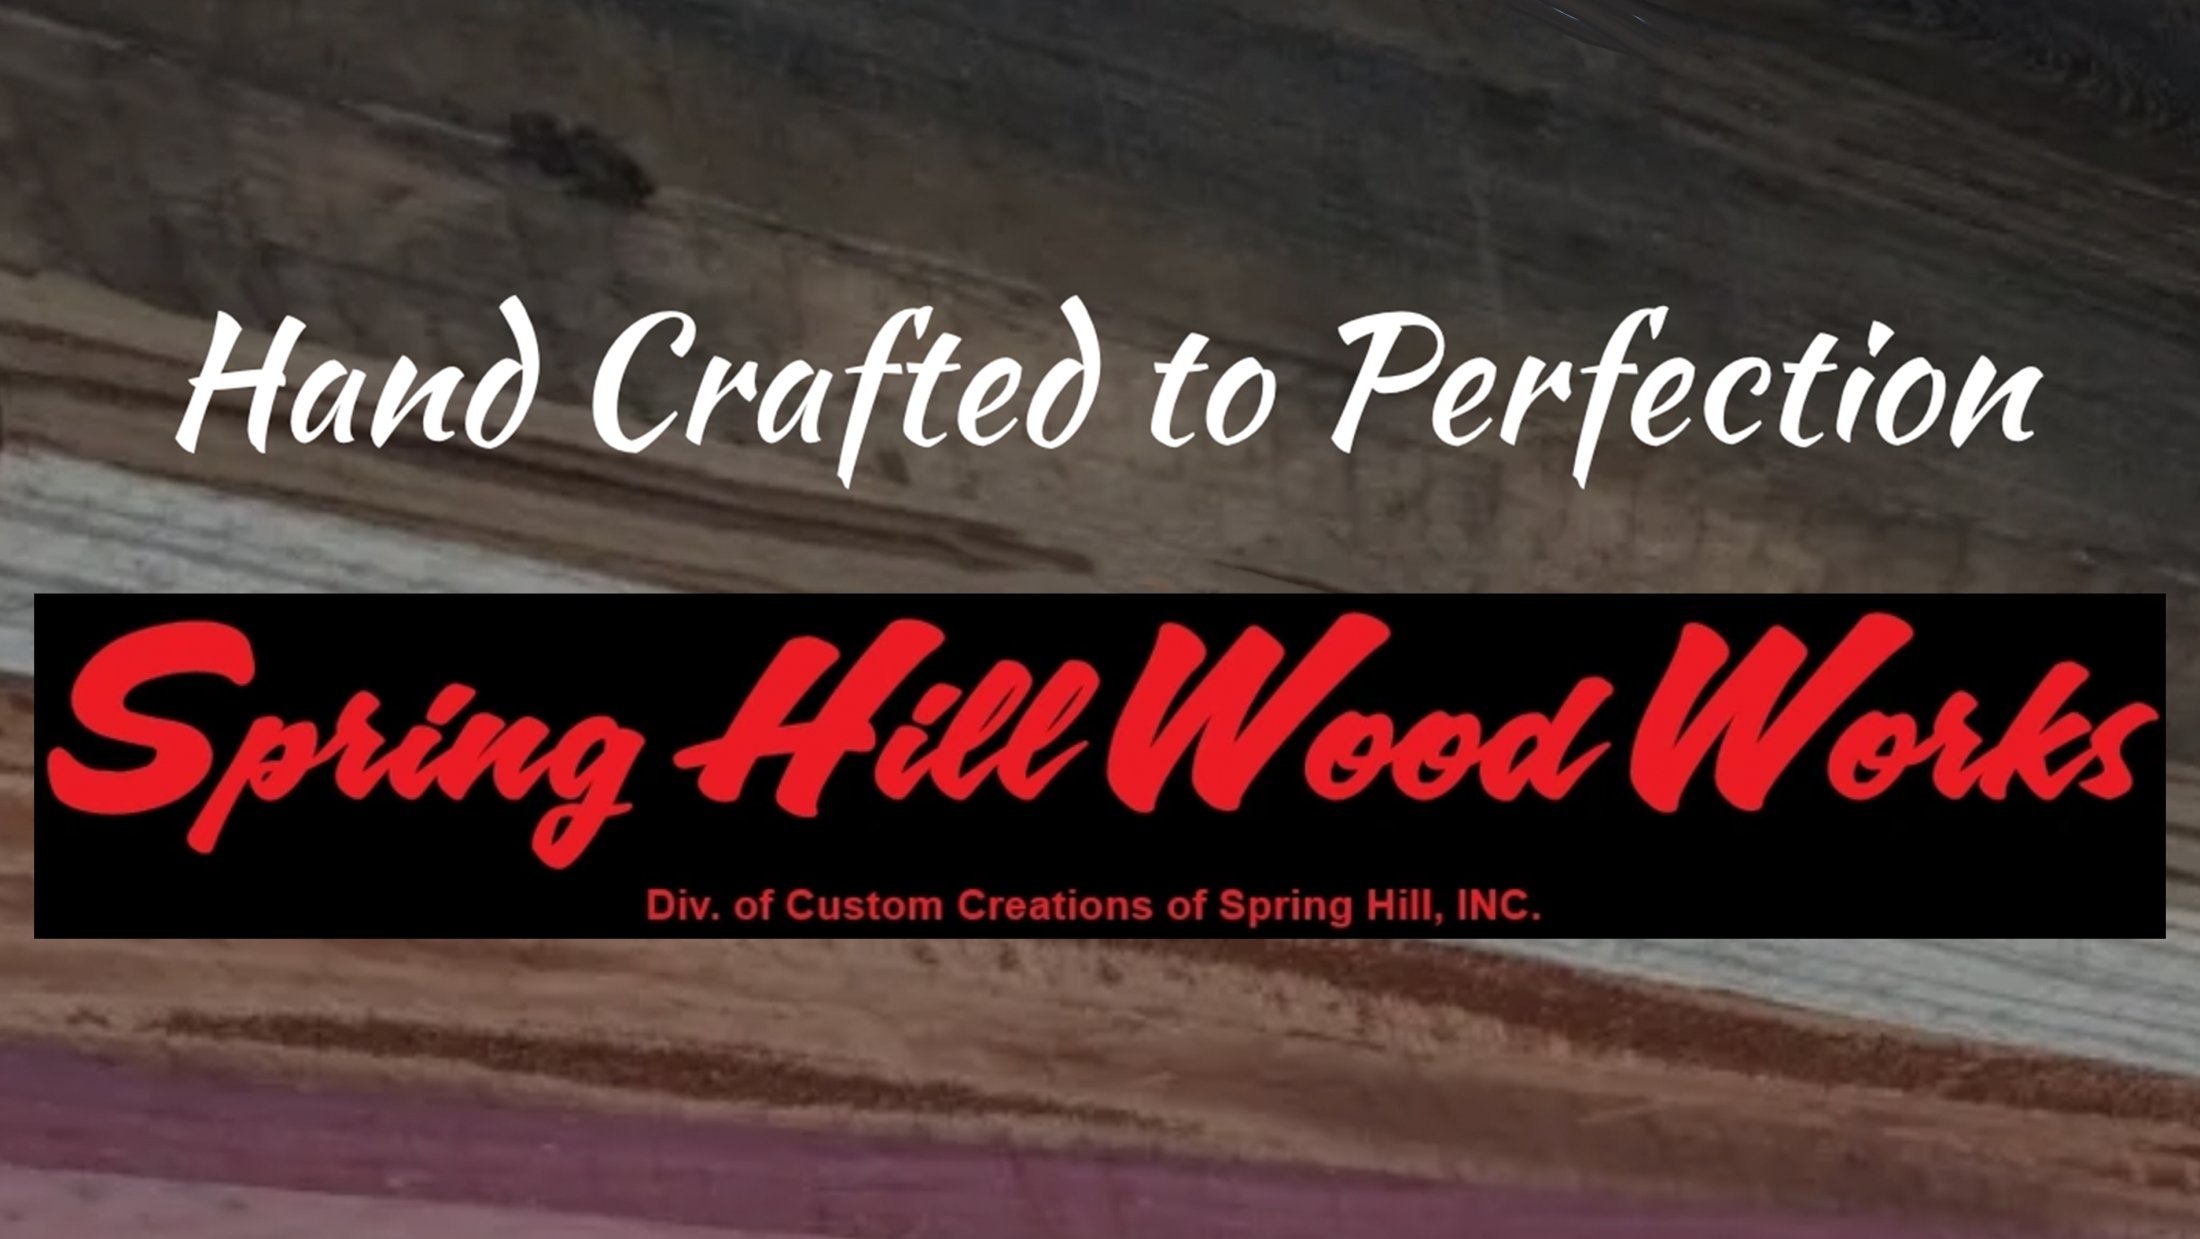 Spring Hill Wood Works